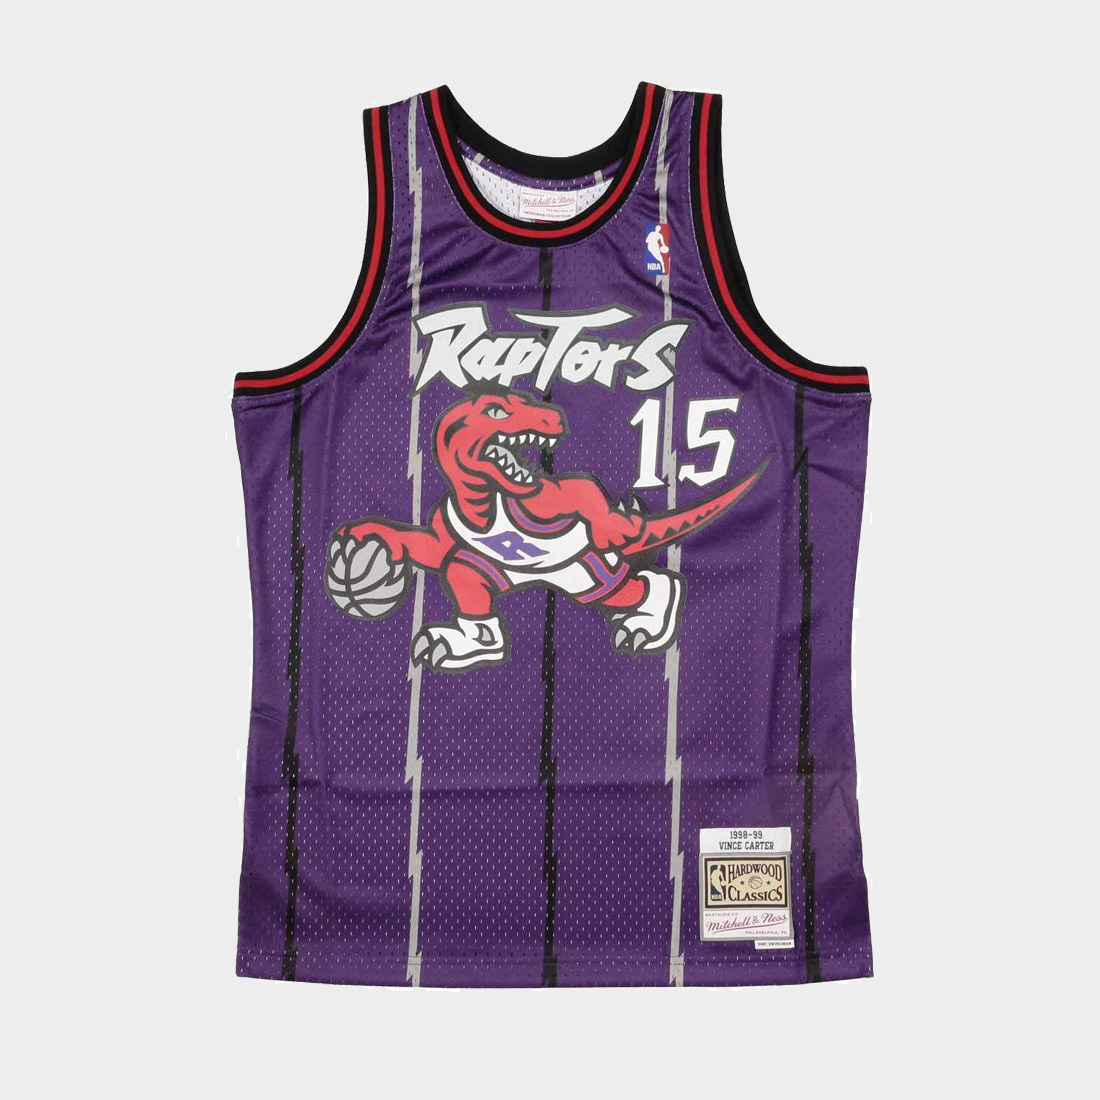 vince carter mitchell and ness authentic jersey